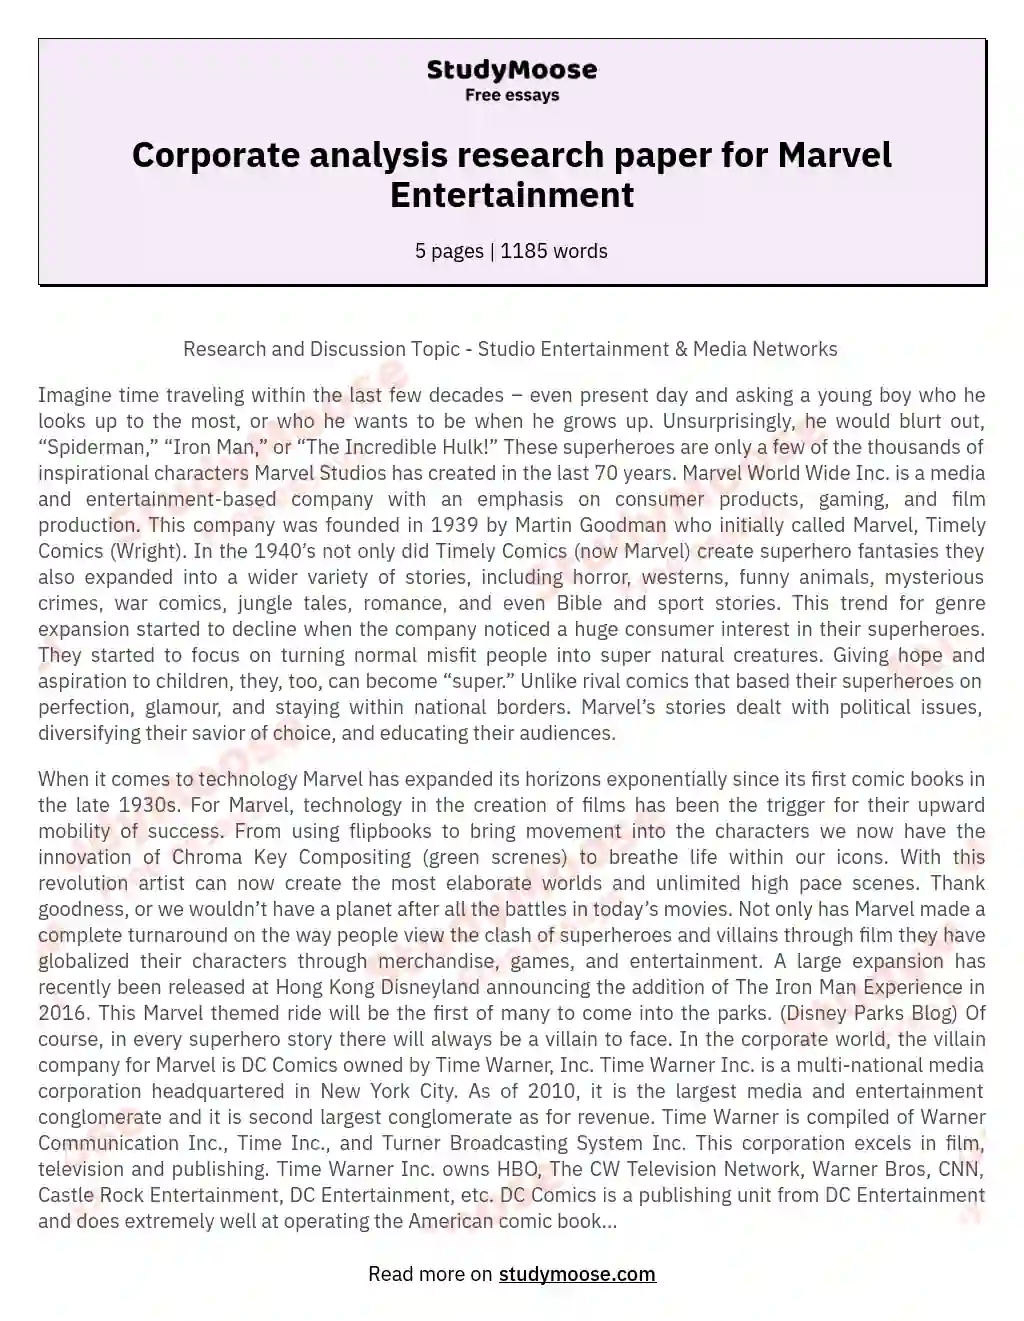 Corporate analysis research paper for Marvel Entertainment